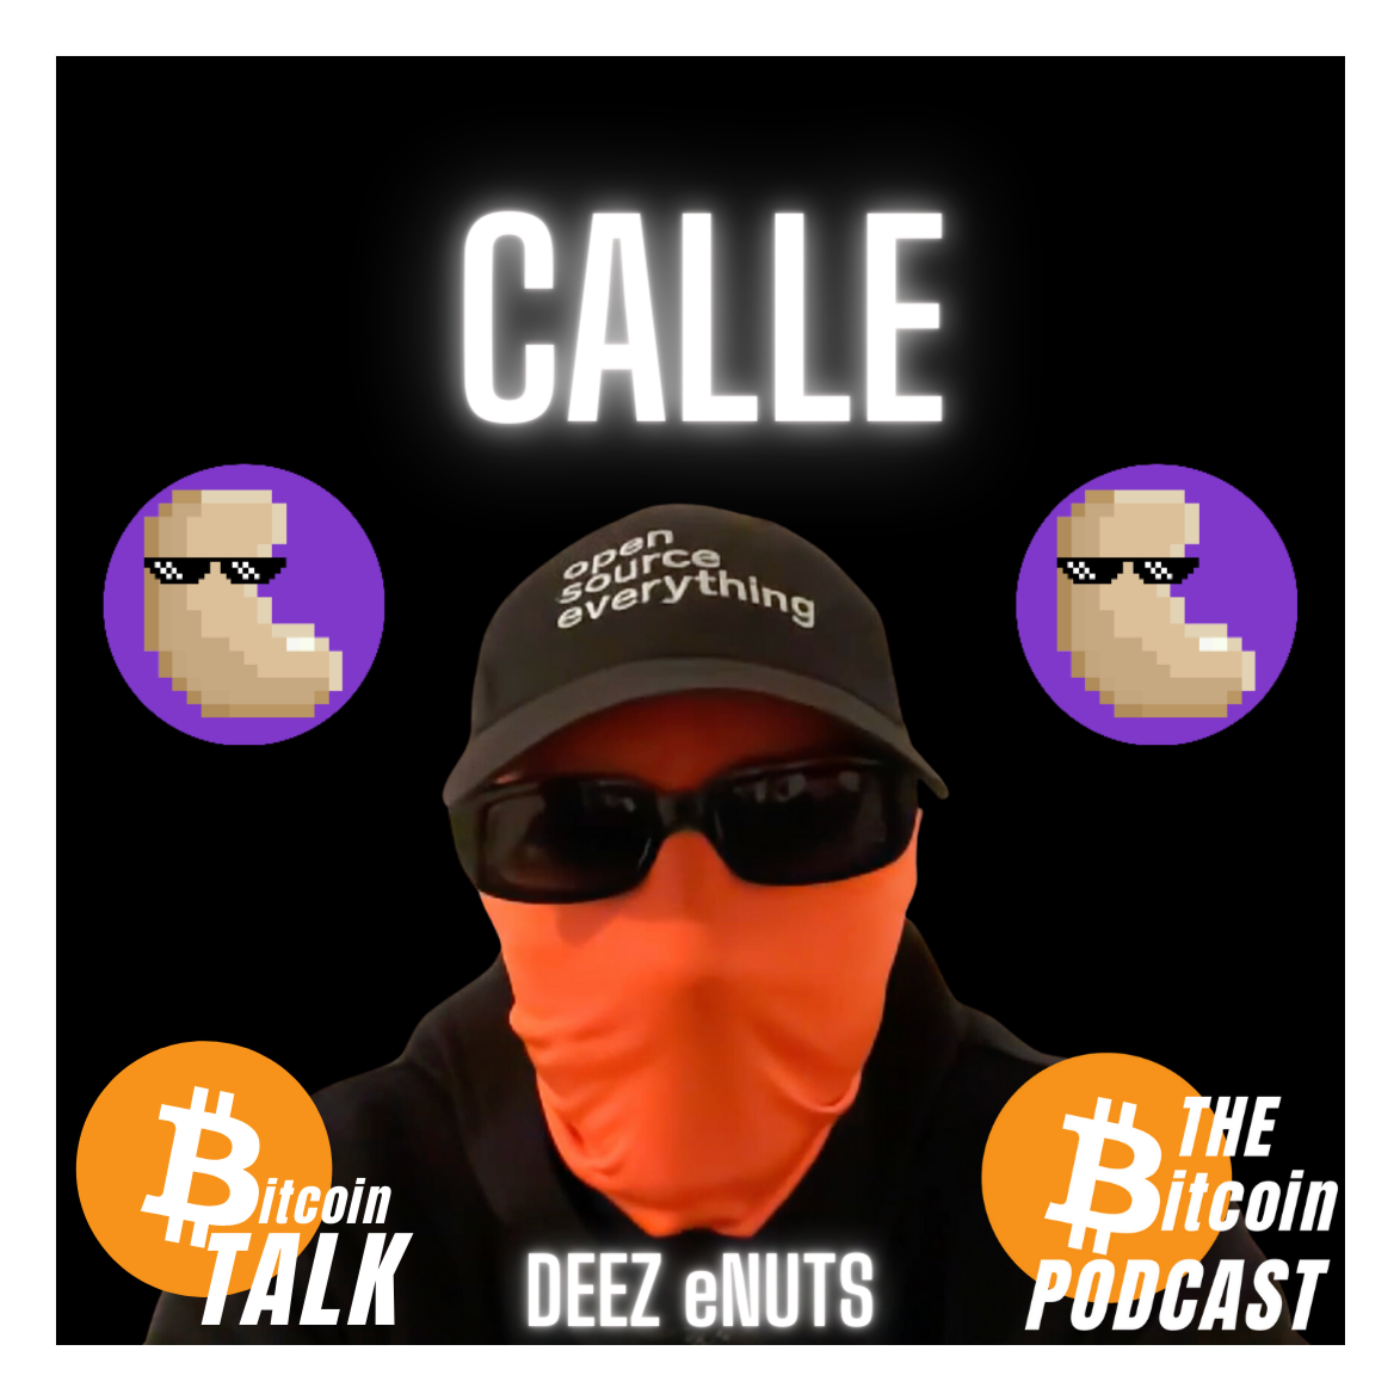 DEEZ eNUTS: Everything You Need to Know About Ecash - Calle (Bitcoin Talk on THE Bitcoin Podcast)